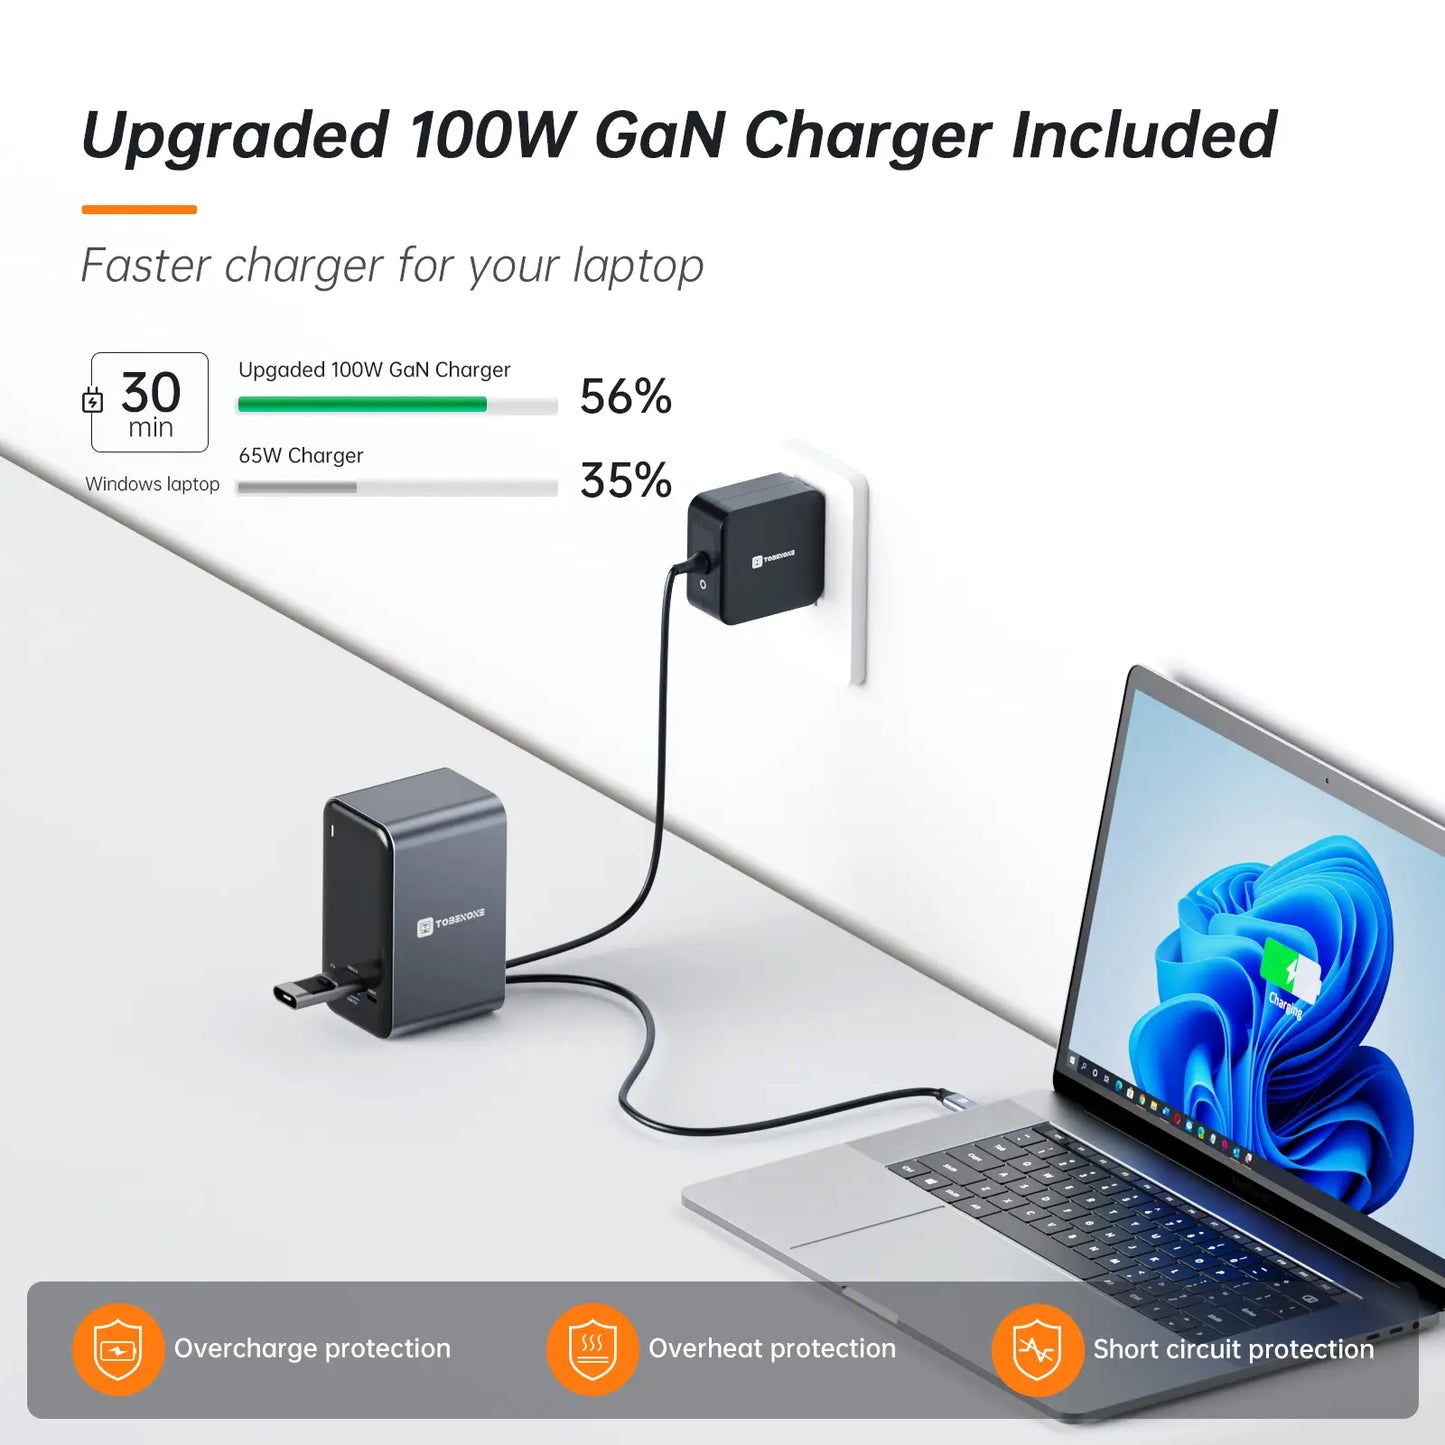 USB C docking stationfor Dell laptops with 100W charger